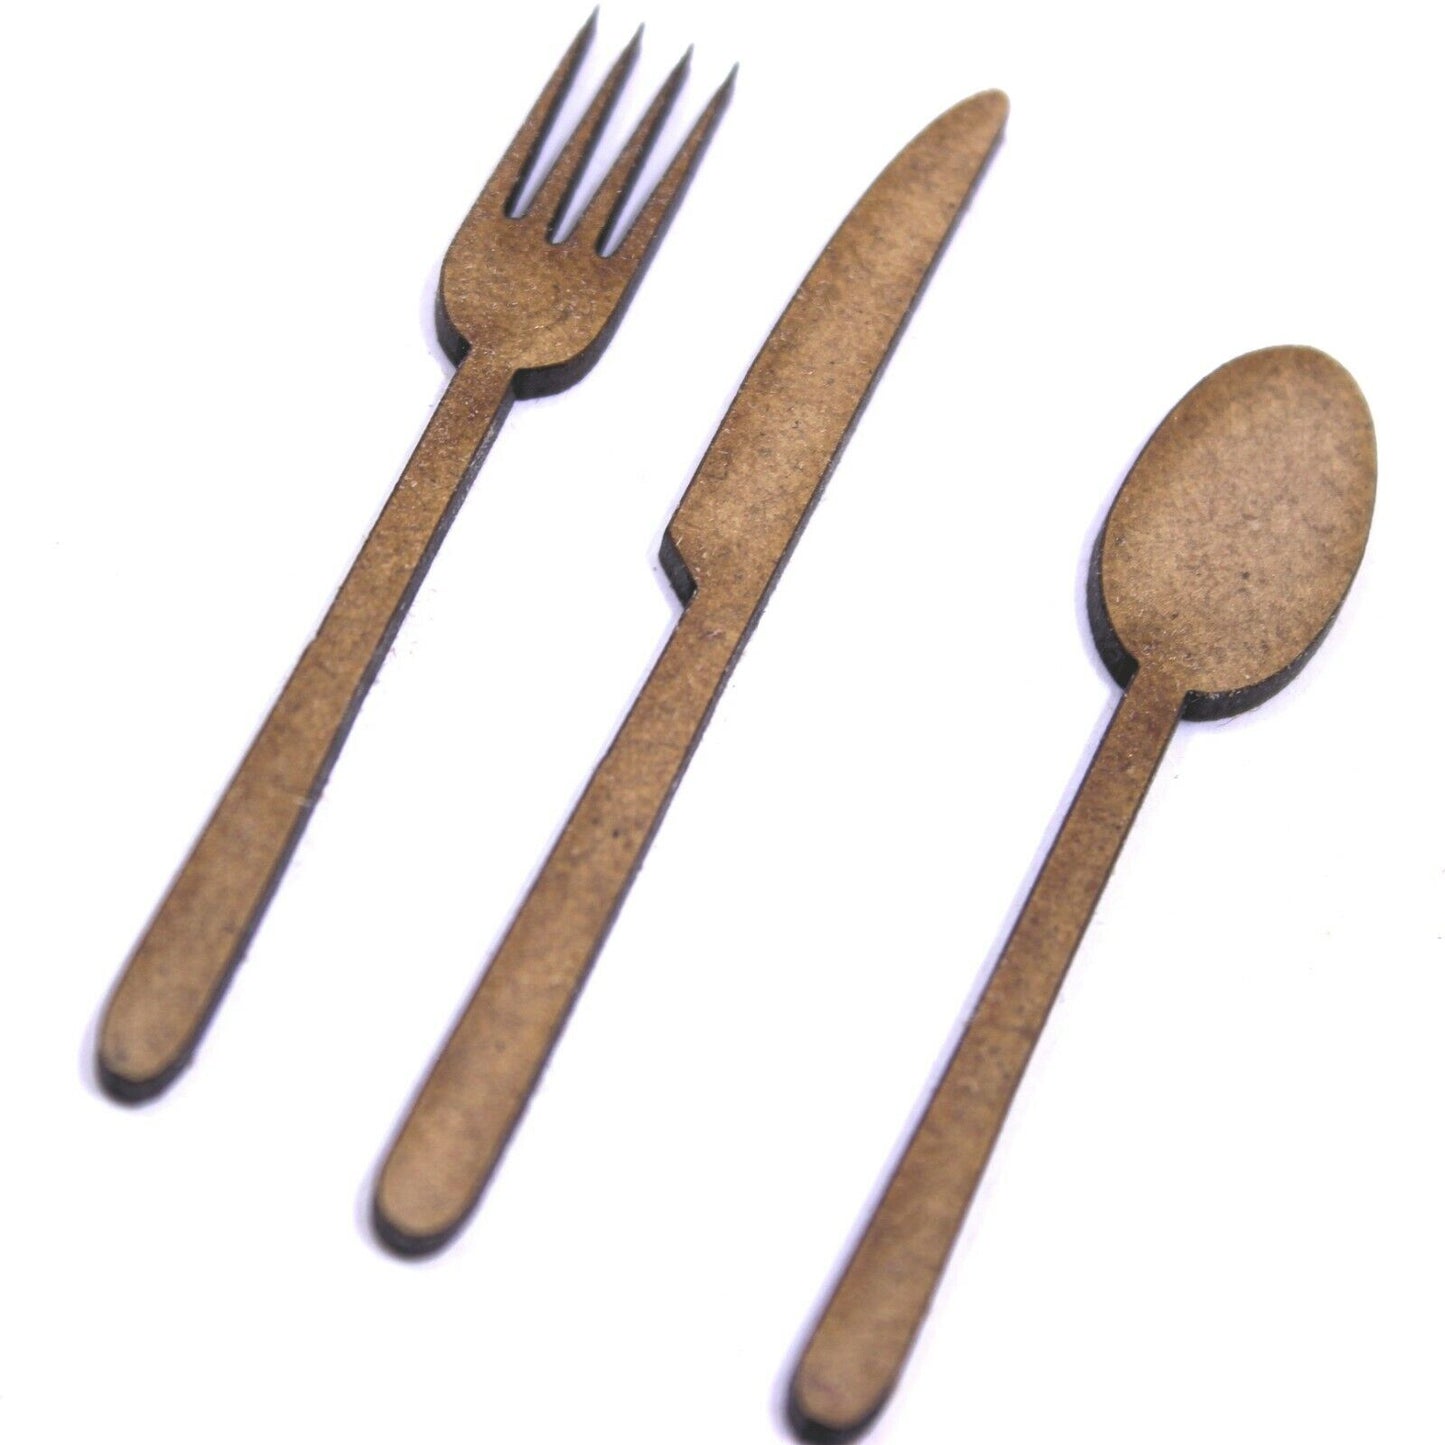 Cutlery Set Craft Shape, Various Sizes, 2mm MDF Wood. Knife, Fork, Spoon